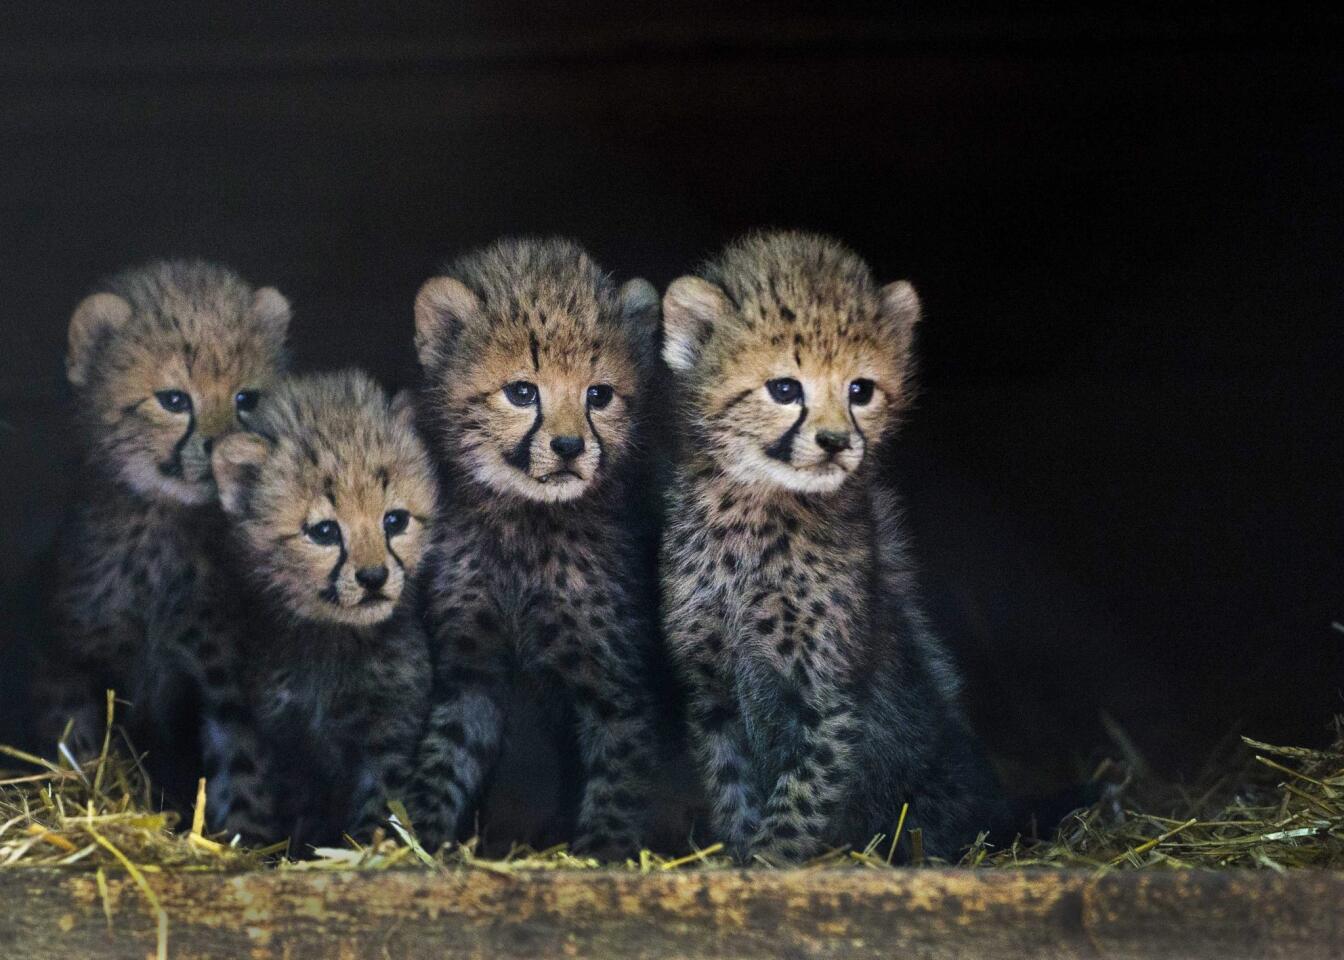 Four of the six cheetah cubs at about 2 months old.